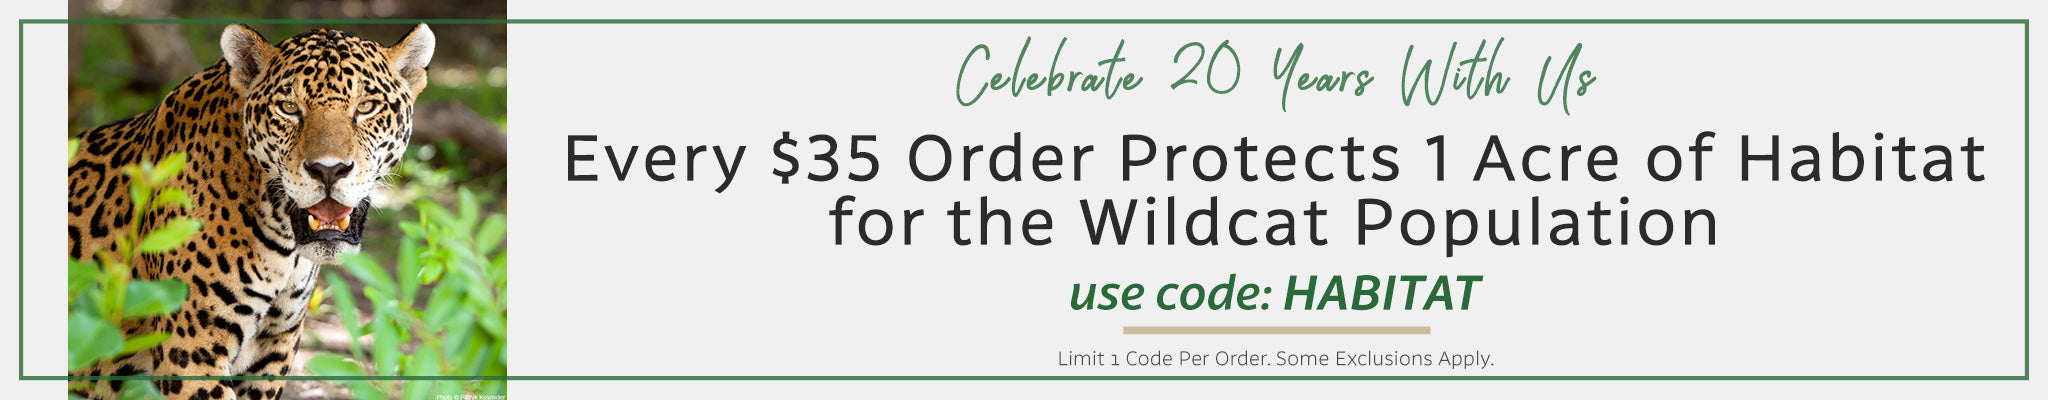 Celebrate 20 Years With Us | Every $35 Order Protects 1 Acre of Habitat for the Wildcat Population | use code: HABITAT | Limit 1 code per order. Some exclusions apply.